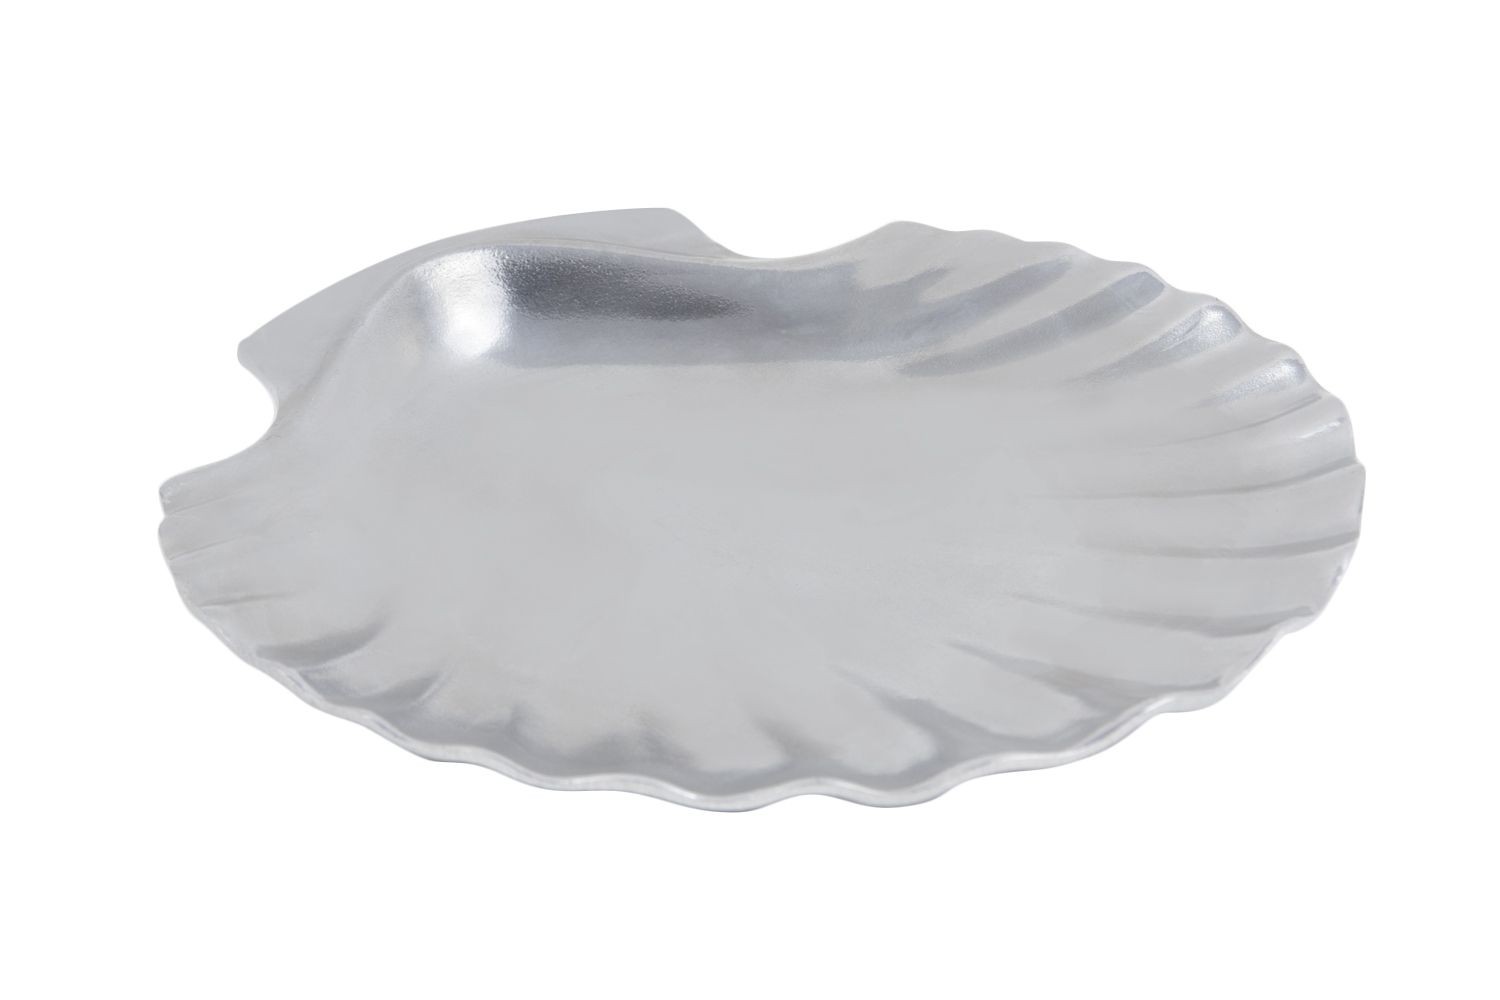 Bon Chef 5075P Serving Shell, Pewter Glo 11" Dia., Set of 3